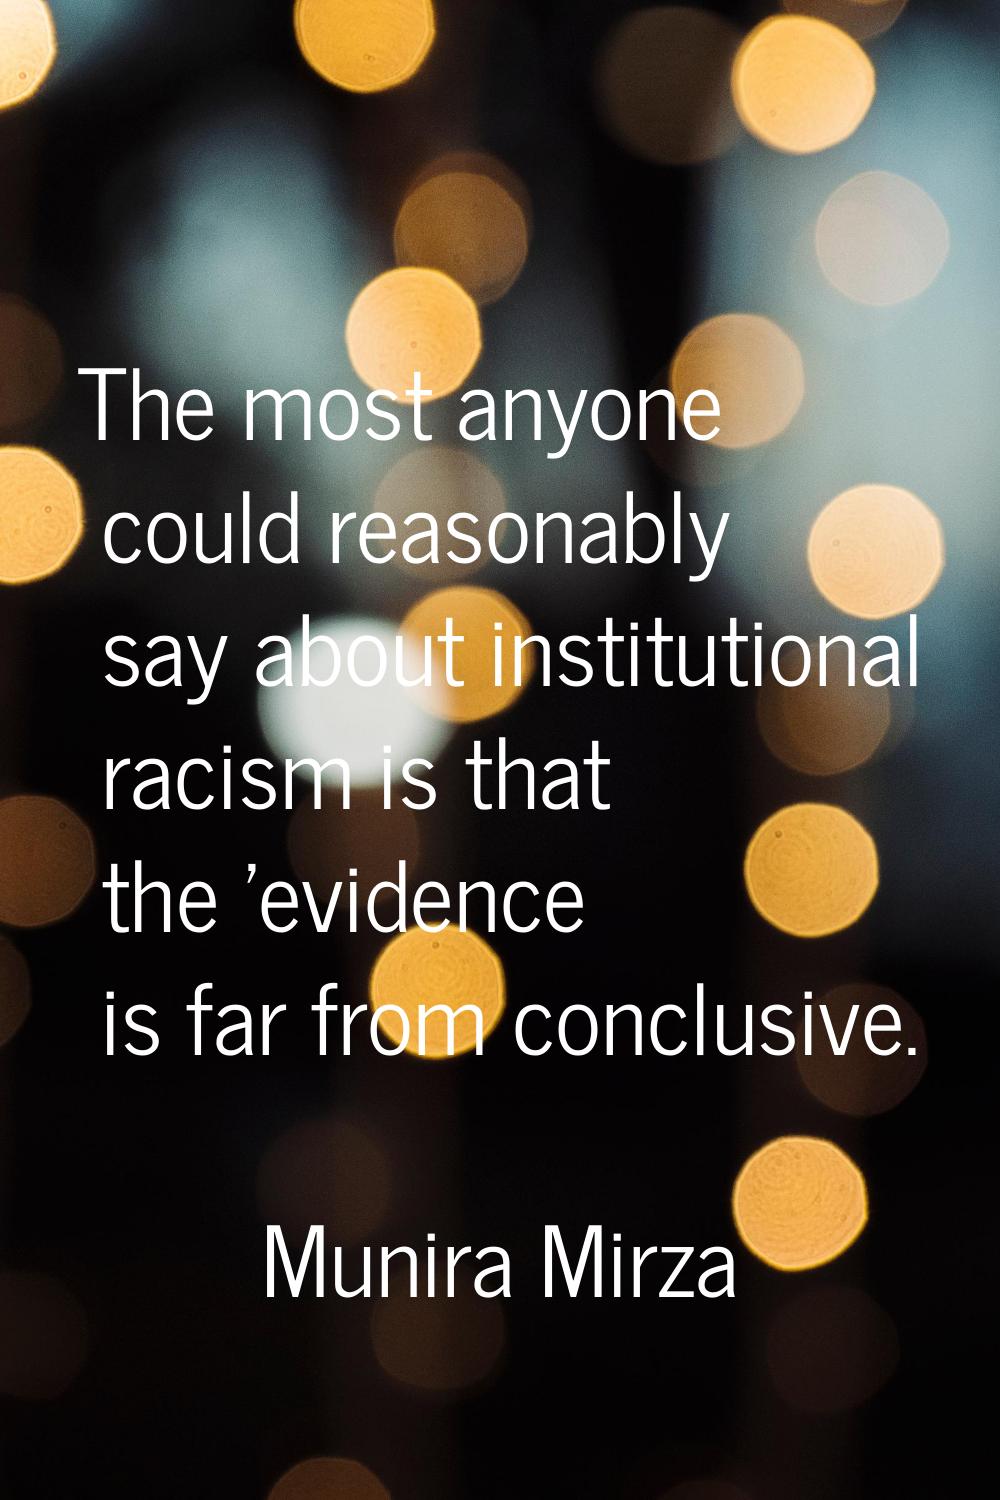 The most anyone could reasonably say about institutional racism is that the 'evidence is far from c